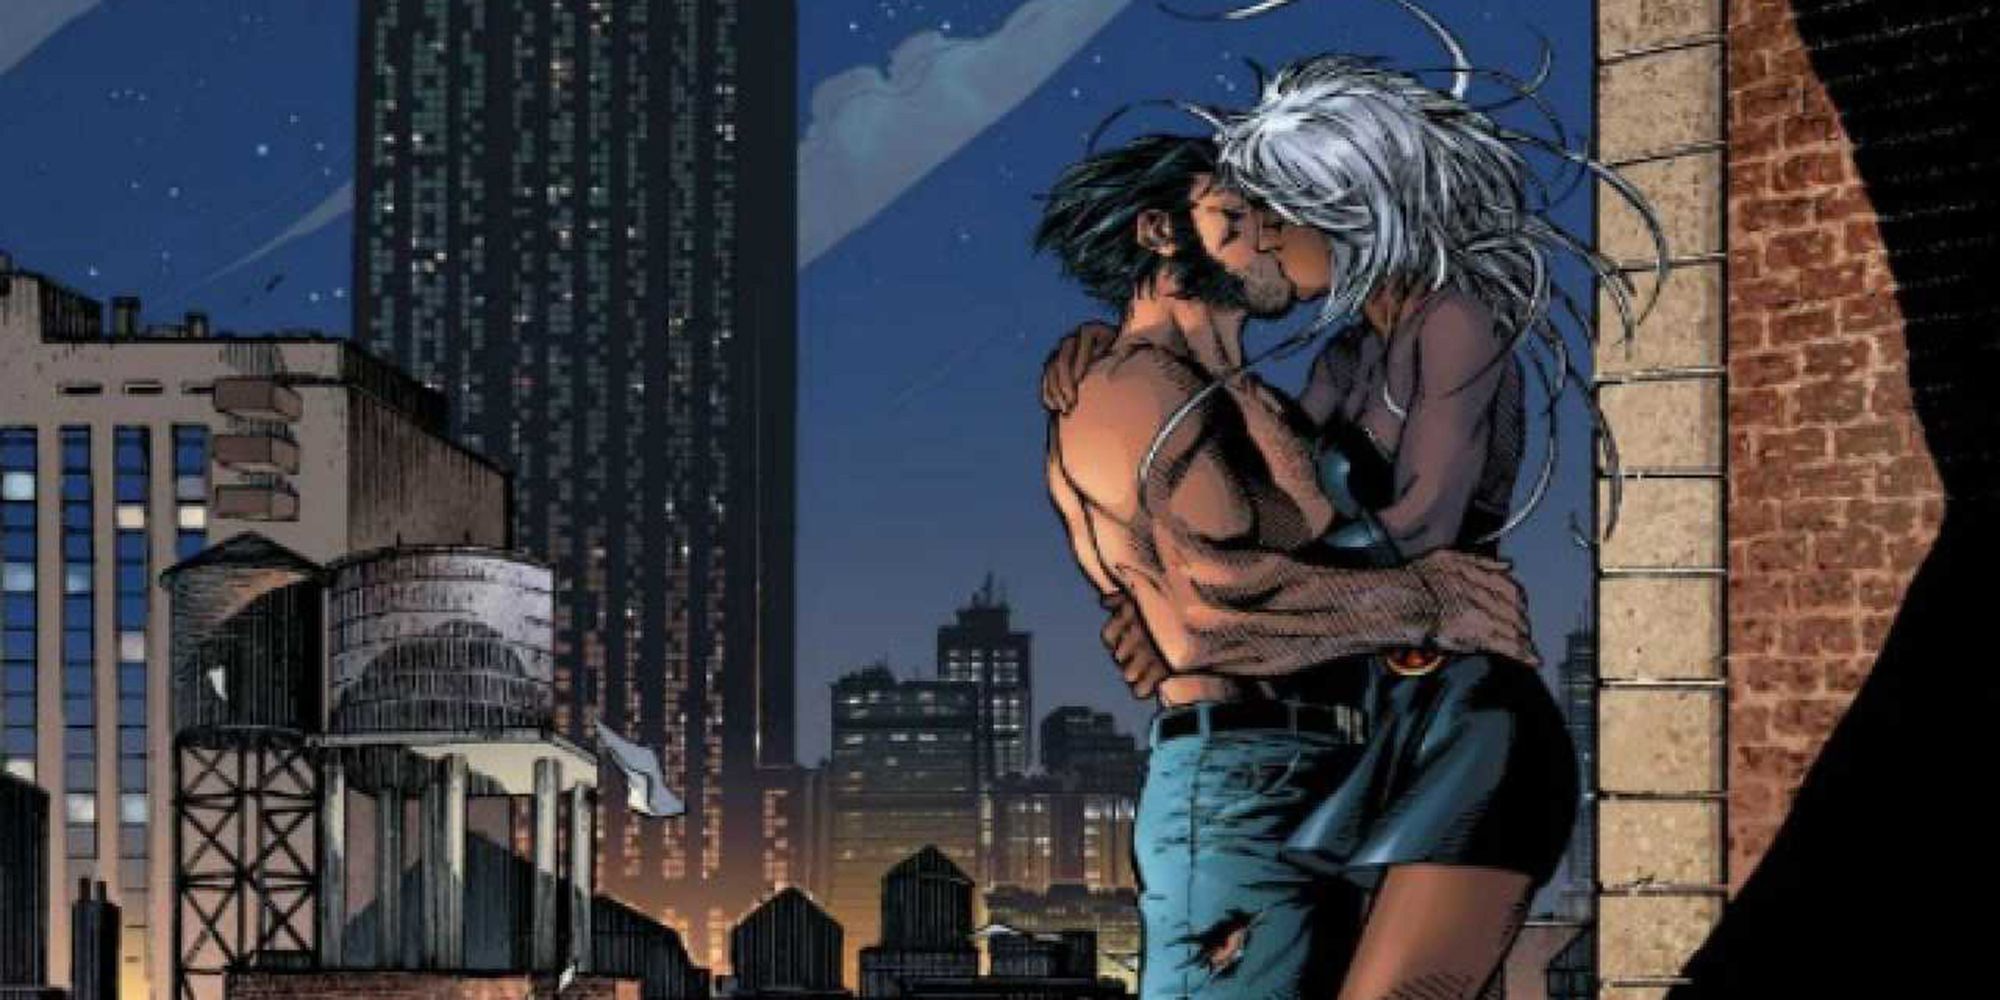 Wolverine and Storm kissing on a rooftop in Marvel comics.